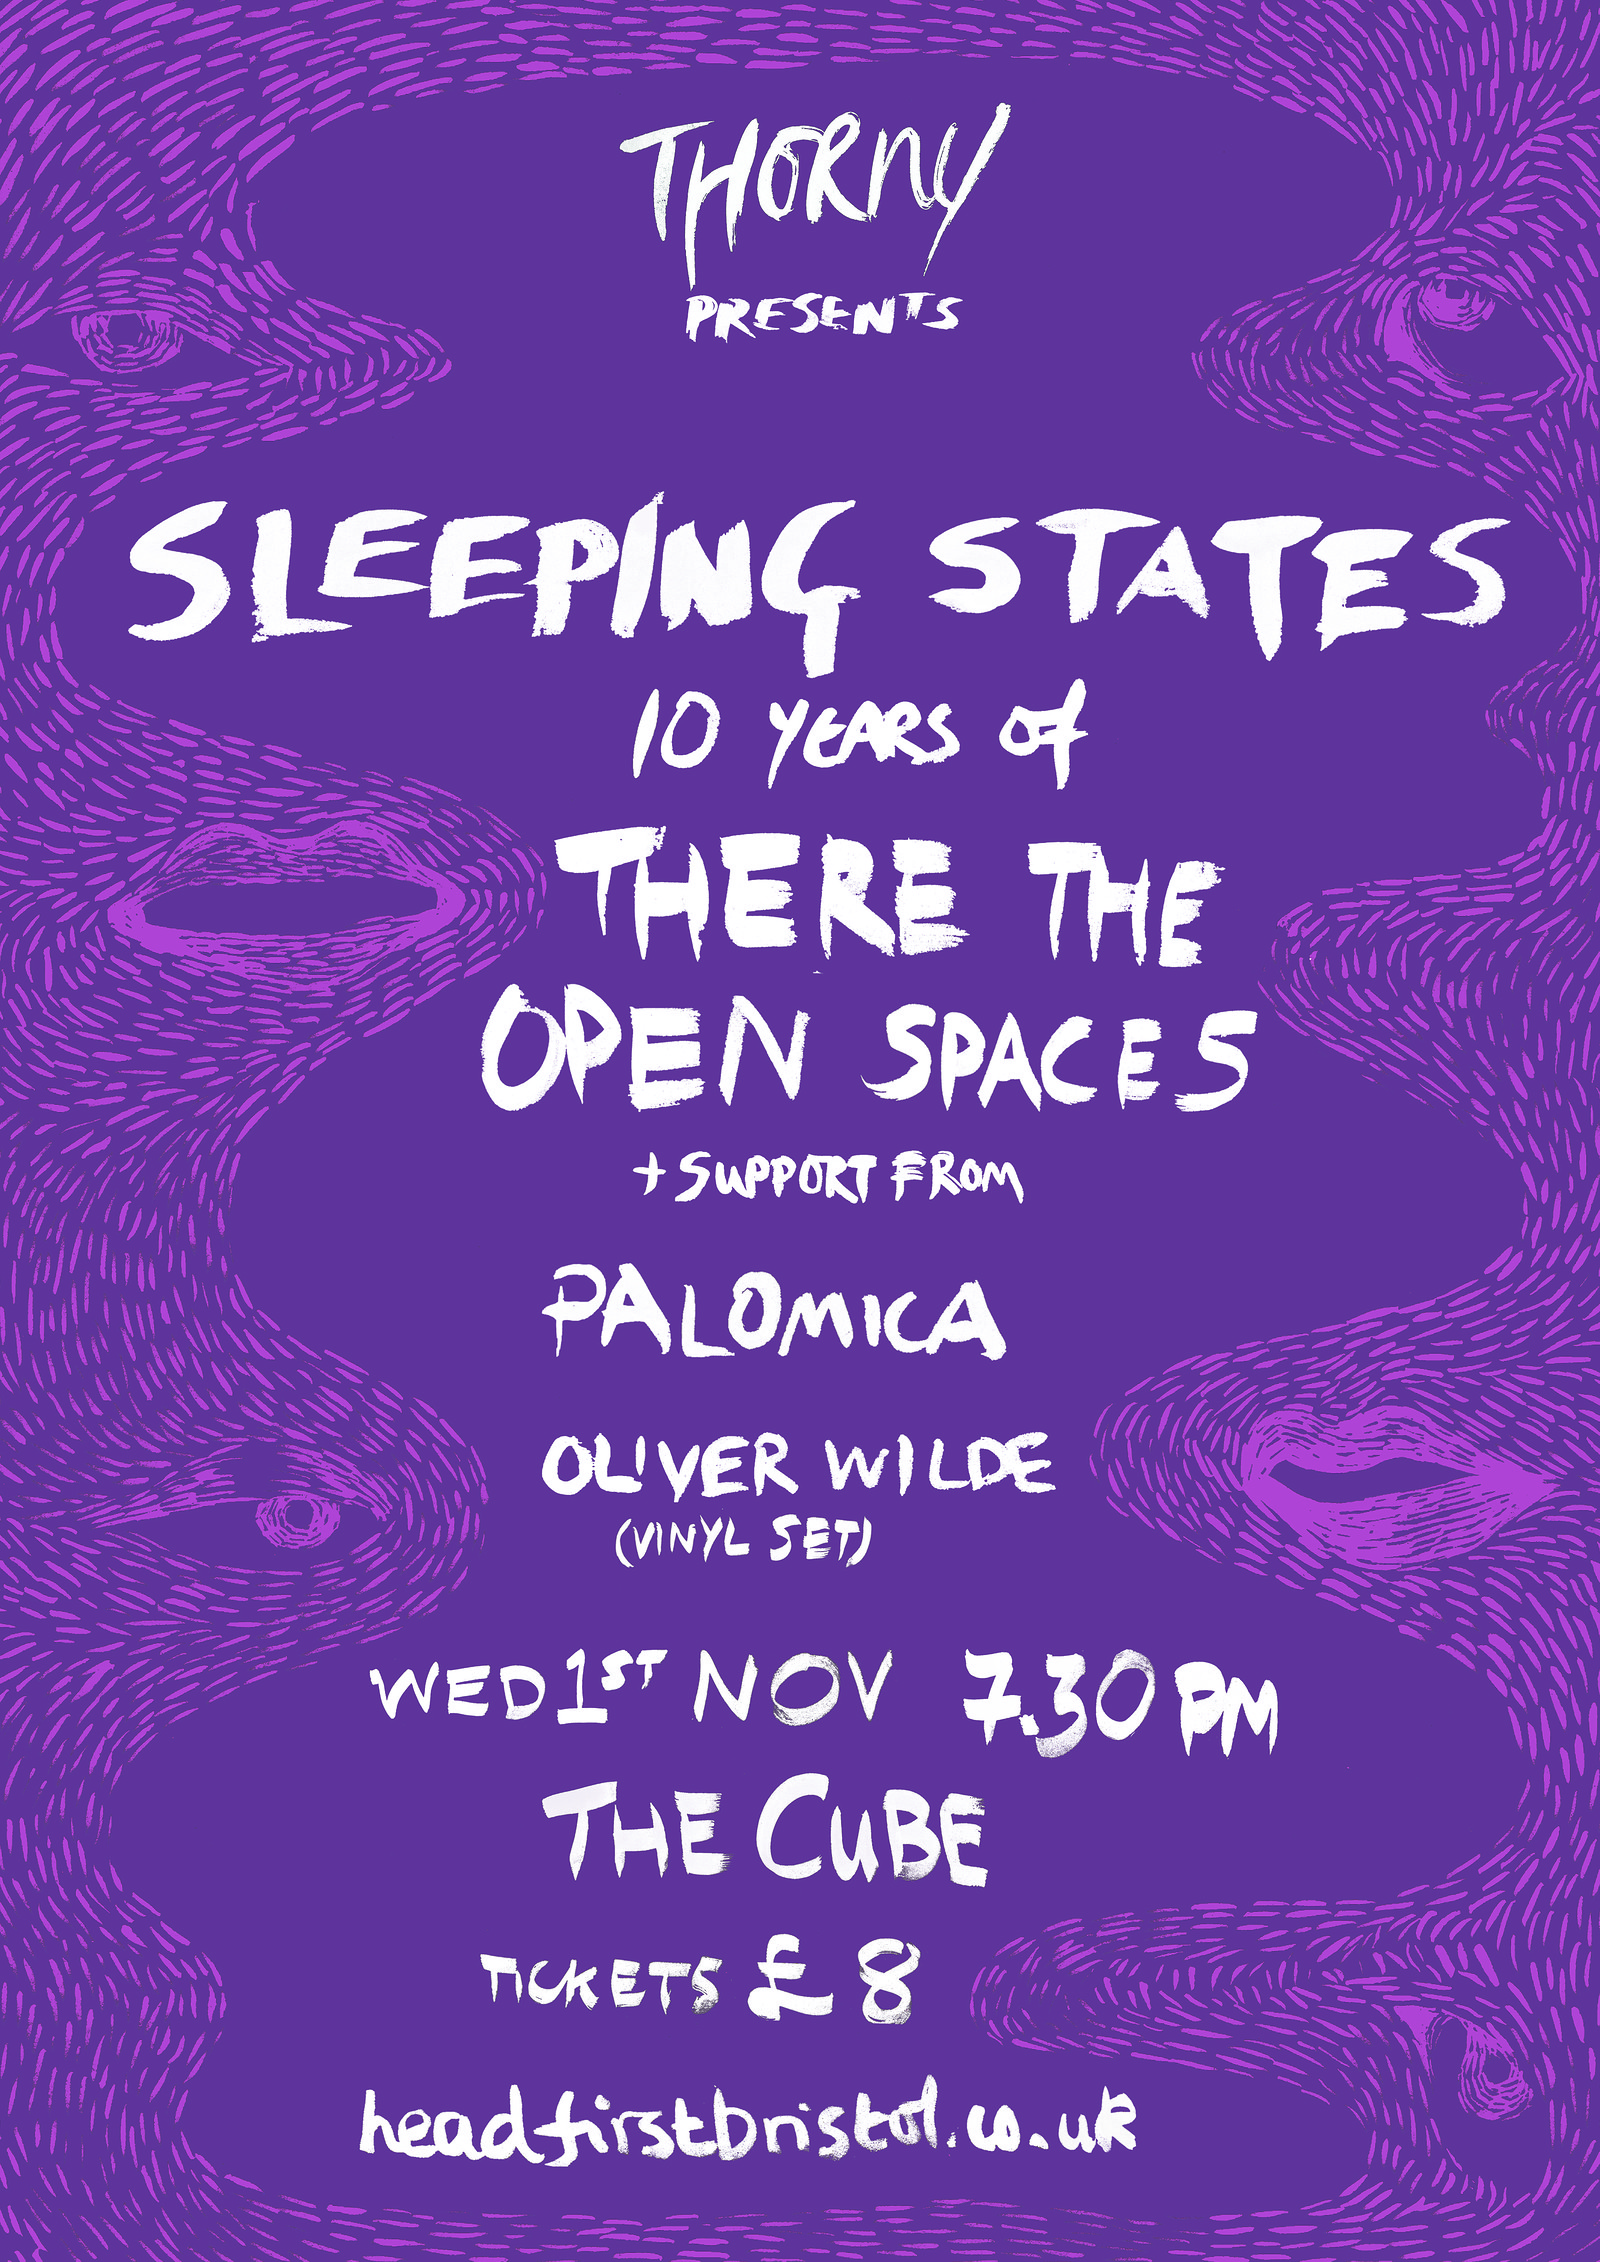 Thorny presents Sleeping States at The Cube